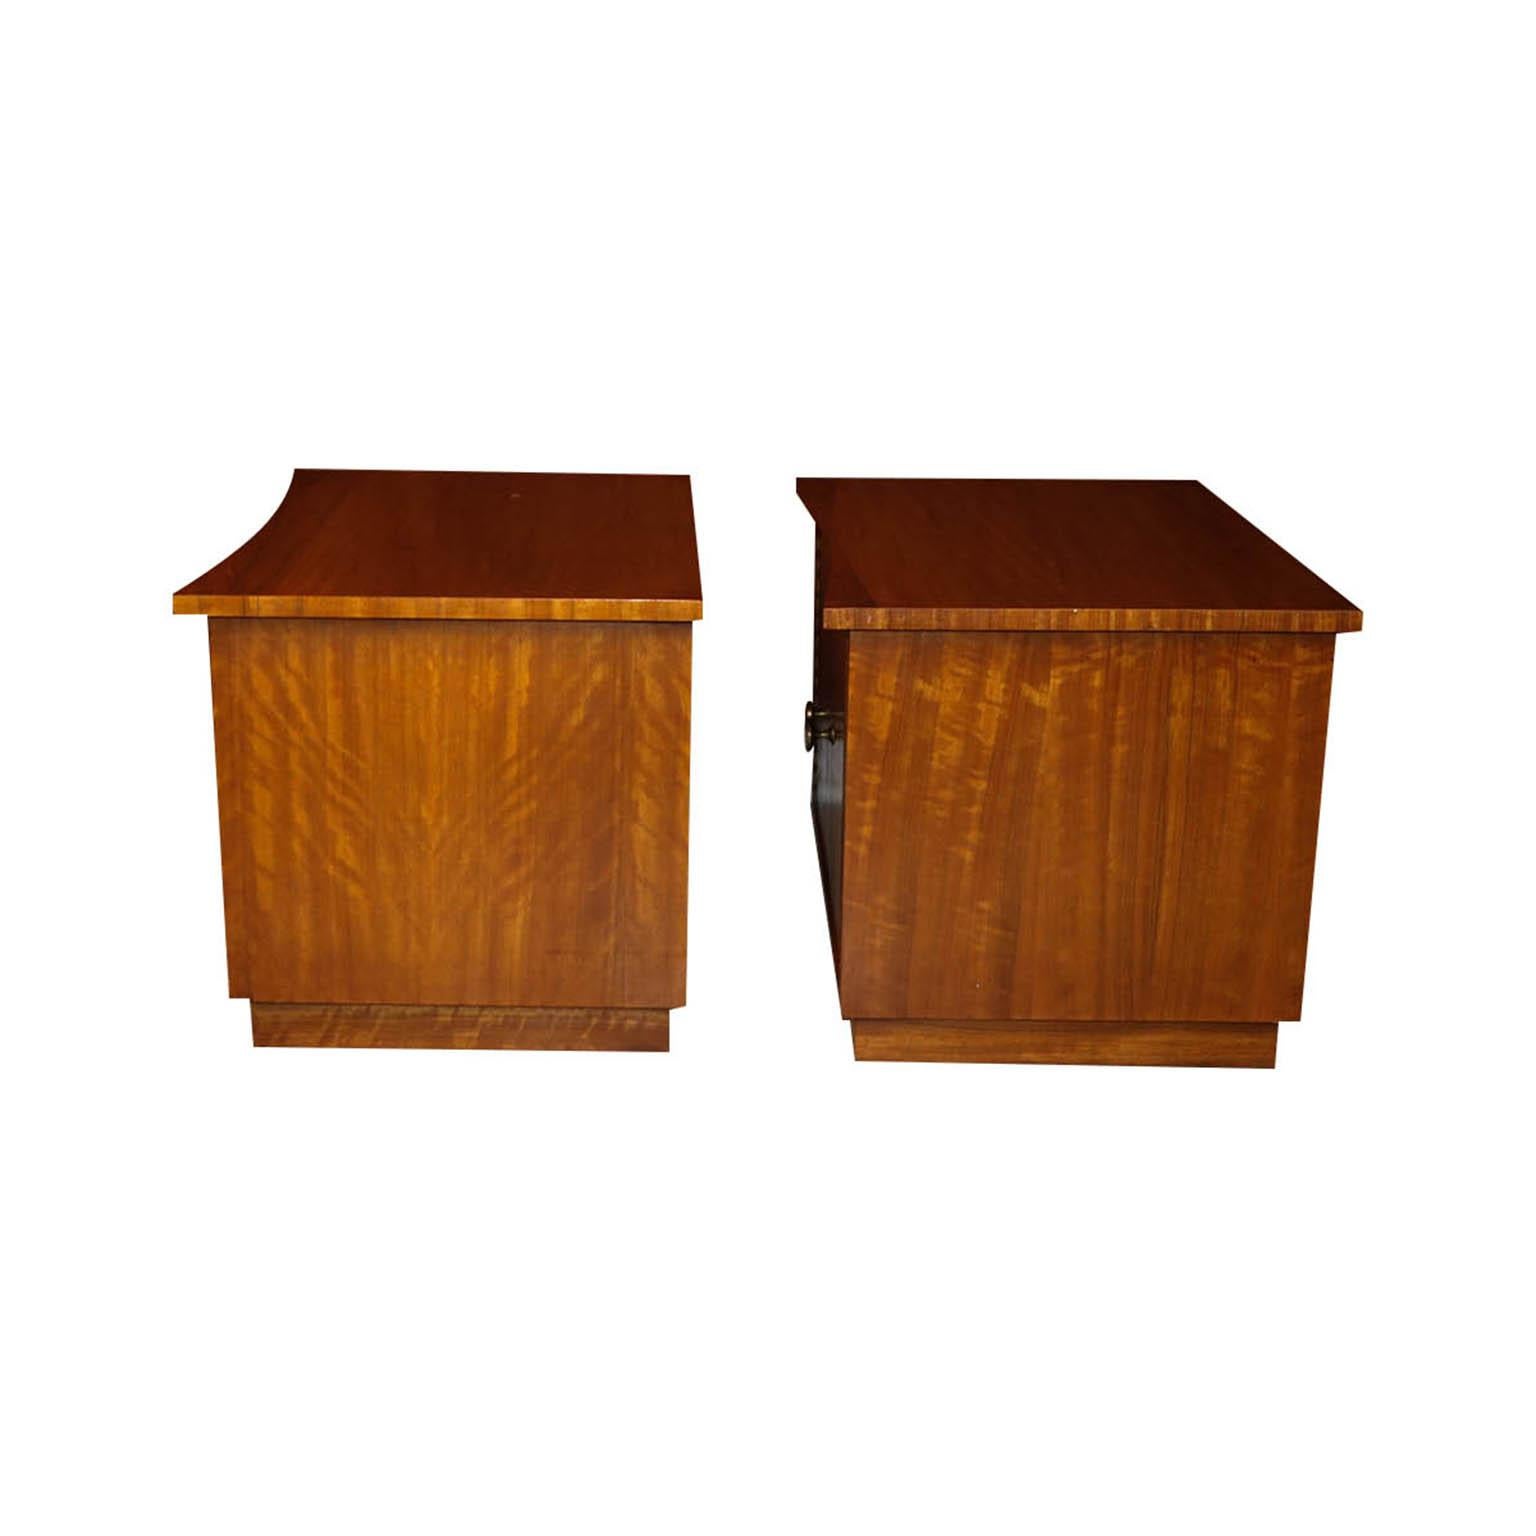 Midcentury Lane Furniture Nightstands Cabinets Tables 3